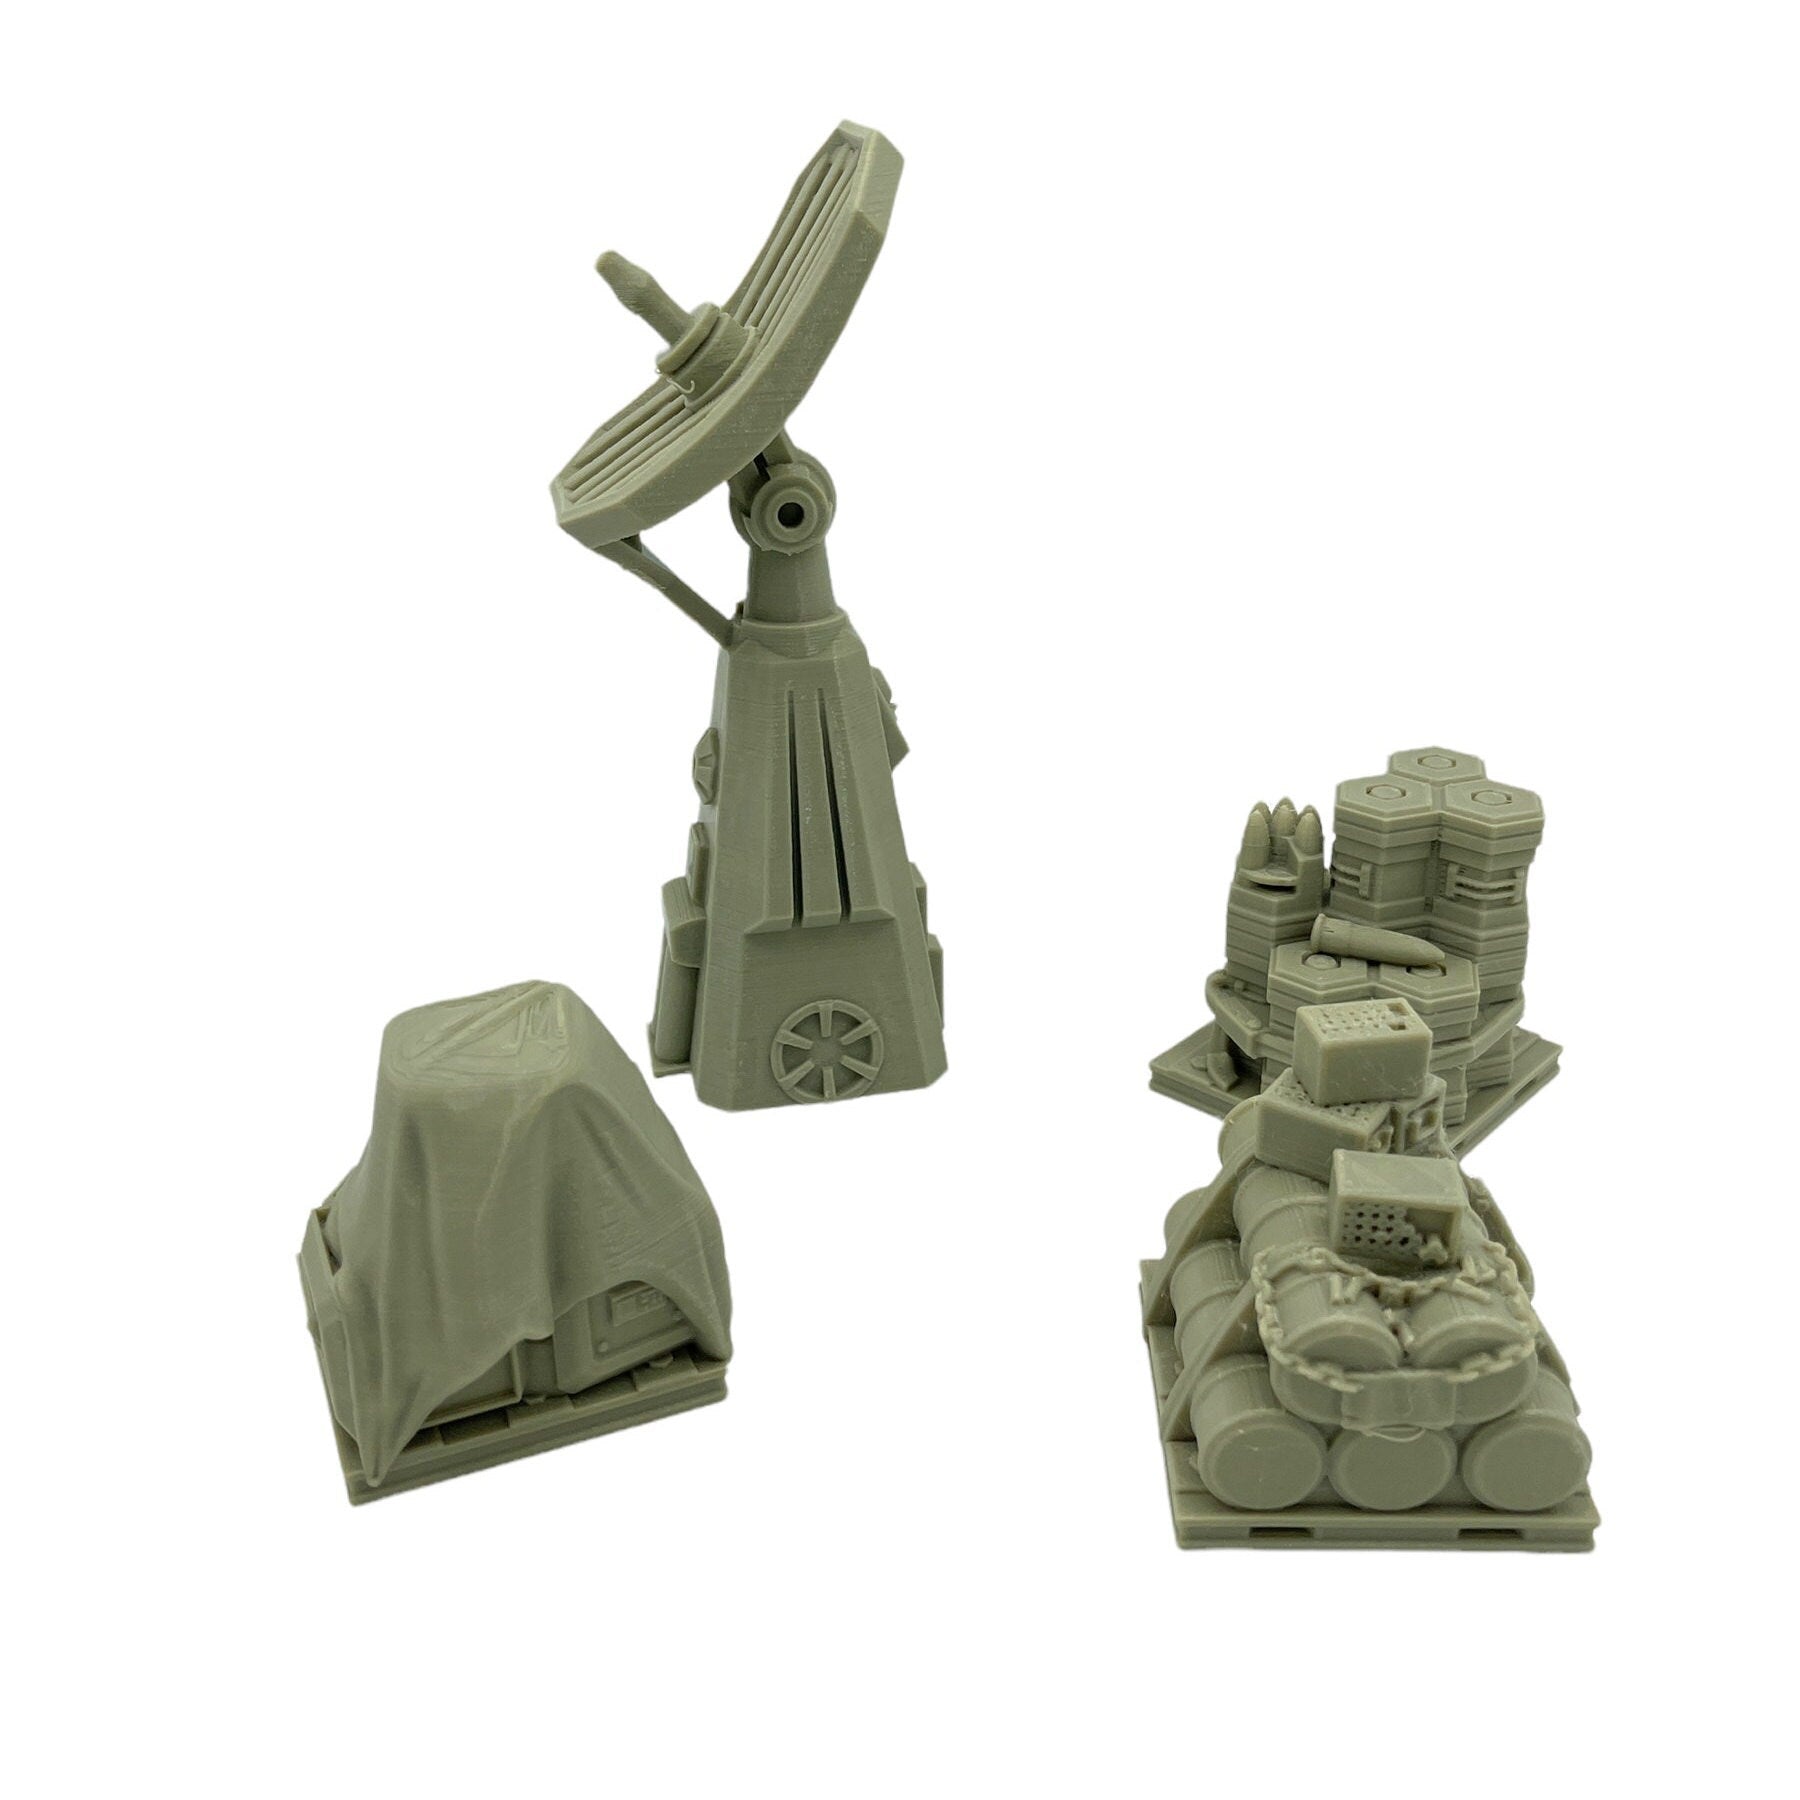 Outpost Scatter Pack / Txarli Factory / Legion and Wargame 3d Printed Tabletop Terrain / Licensed Printer